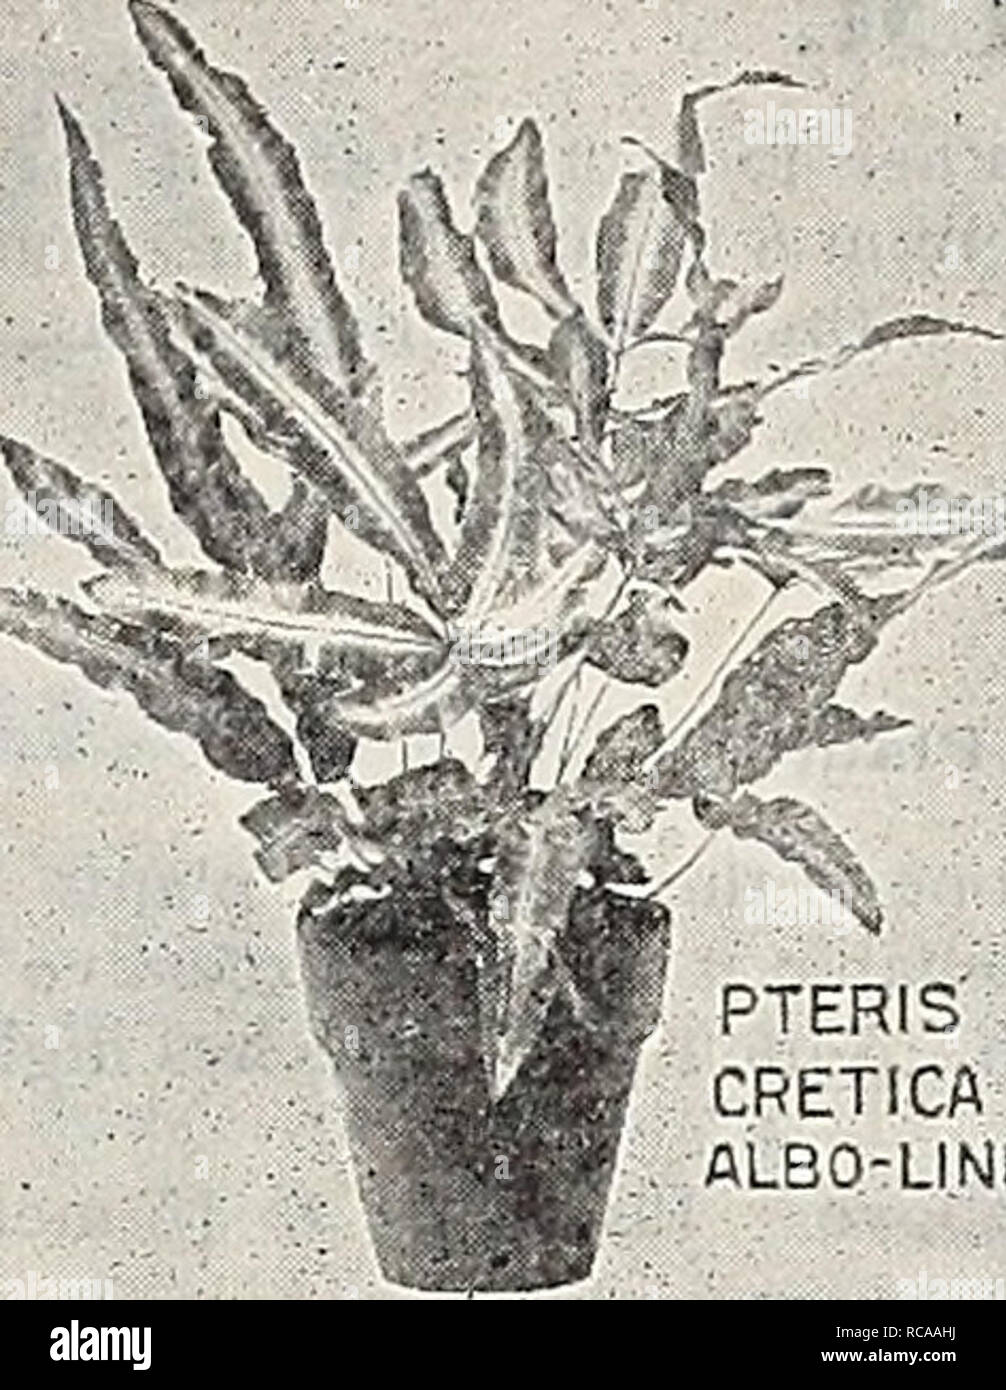 . Dreer's 1907 garden book. Seeds Catalogs; Nursery stock Catalogs; Gardening Equipment and supplies Catalogs; Flowers Seeds Catalogs; Vegetables Seeds Catalogs; Fruit Seeds Catalogs. *^%. '' SELAGINELLA CASSIA ARBOREA. PTERIS CRETICA '':â ..â ALBO-LINEATA' * Lomaria Ciliata. A dwarf Tree Fern. 15 cts. Lygodium Dichotomum. A climbing species, with large, heavy pinnse. 15 cts. â Japonicum. A beautiful Japanese climbing Fern. 15 cts. â Scaudens. A climbing variety with light'green foliage. 15 cts. *Miorolepia Hirta Cristatit. A most useful decorative Fern, beautifully crested. 15 cts. and 25 cts Stock Photo